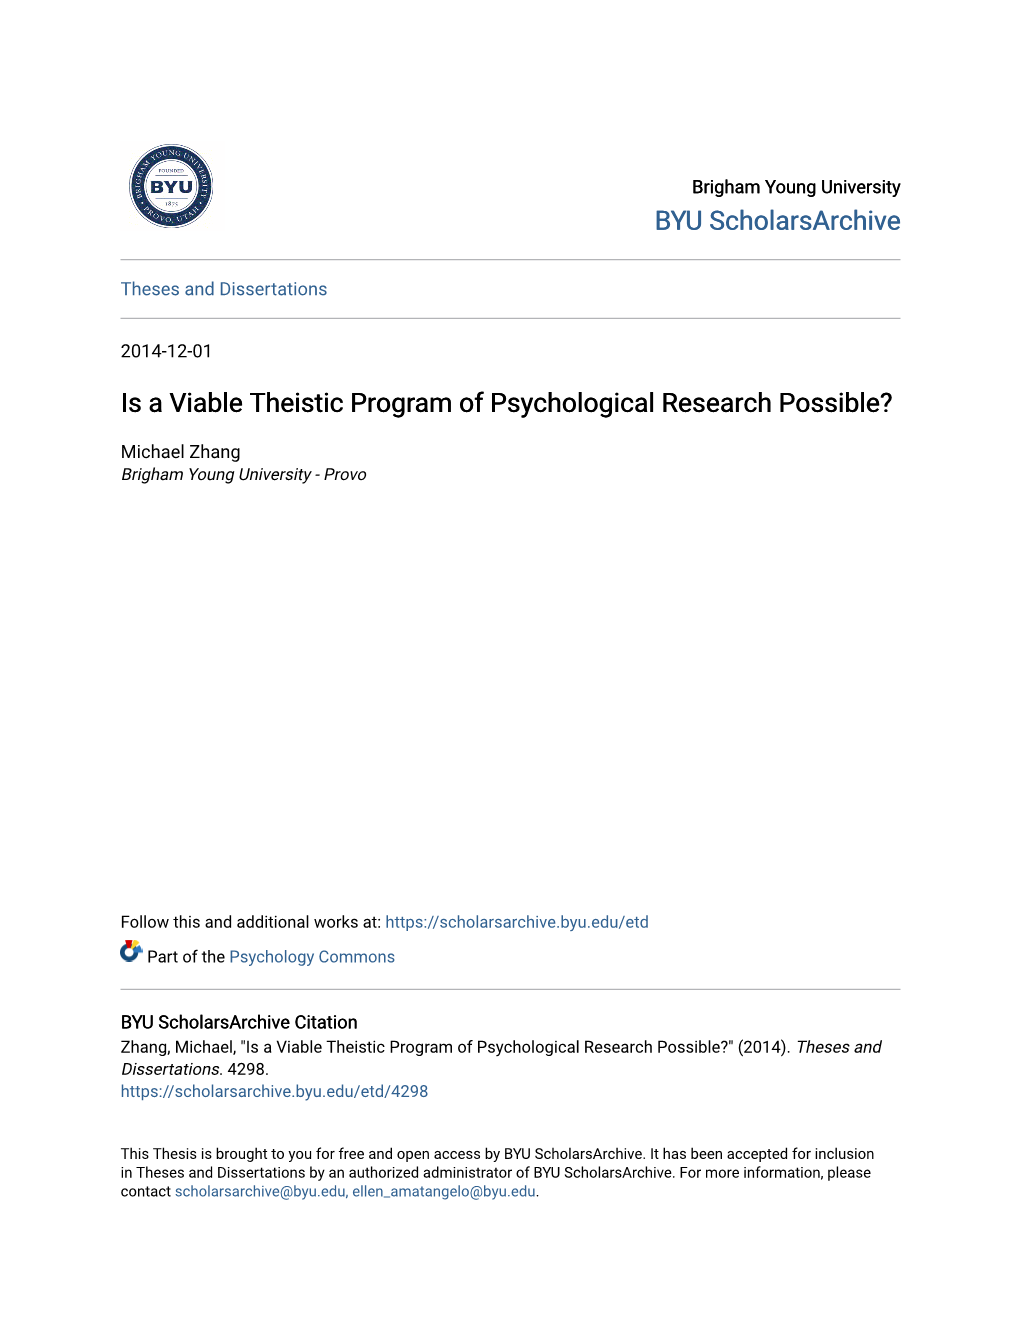 Is a Viable Theistic Program of Psychological Research Possible?